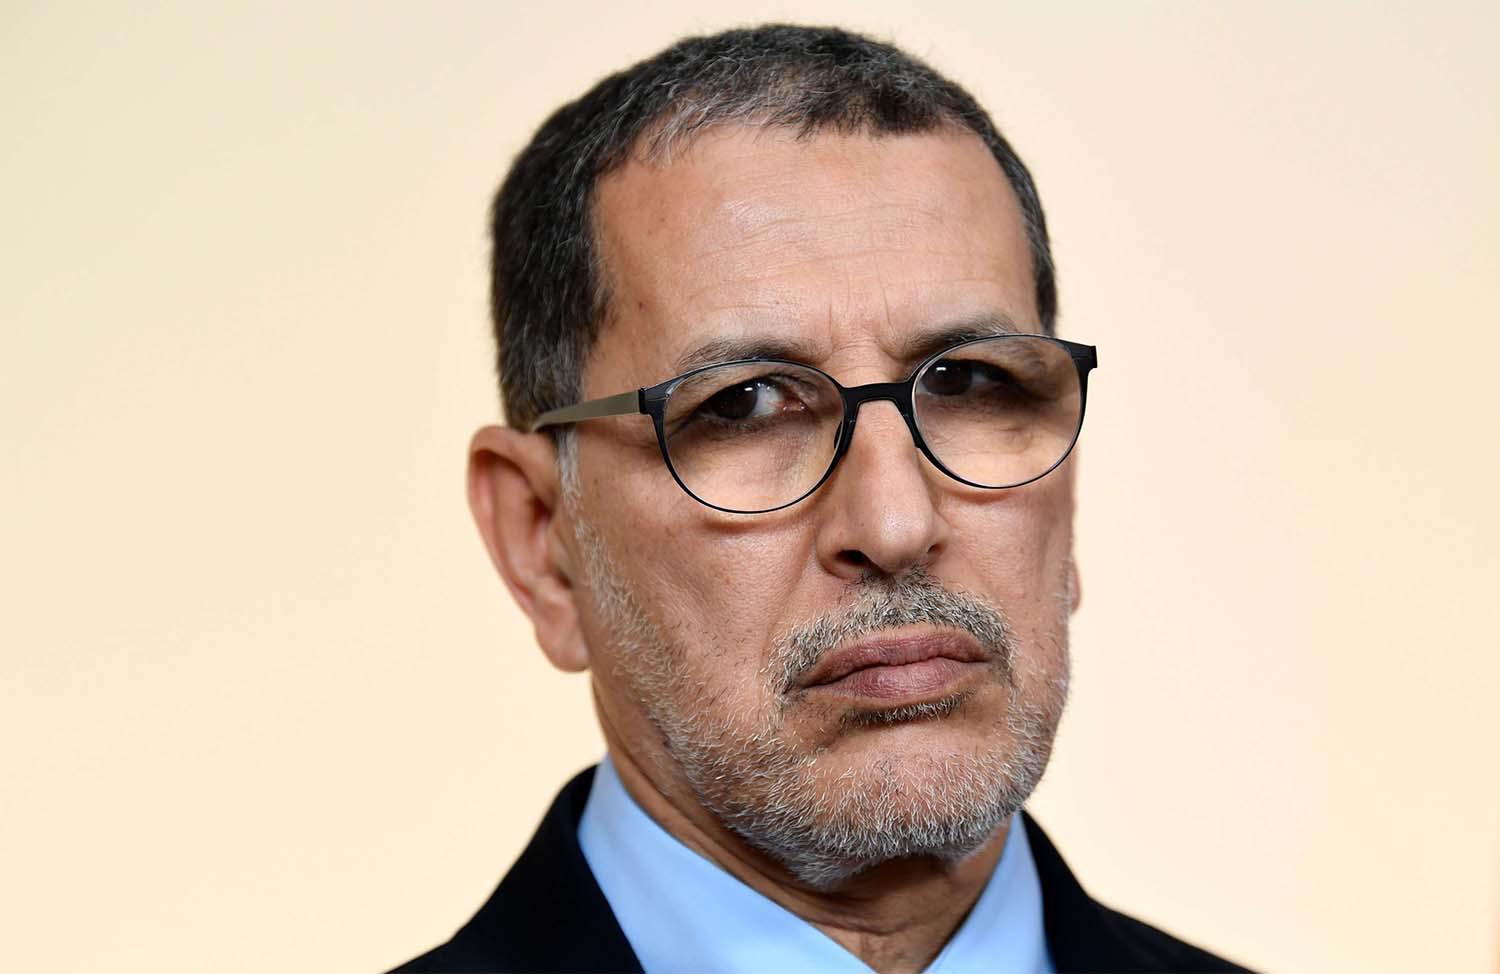 Moroccan PM is asking for scientific evidence which Amnesty has so far failed to provide